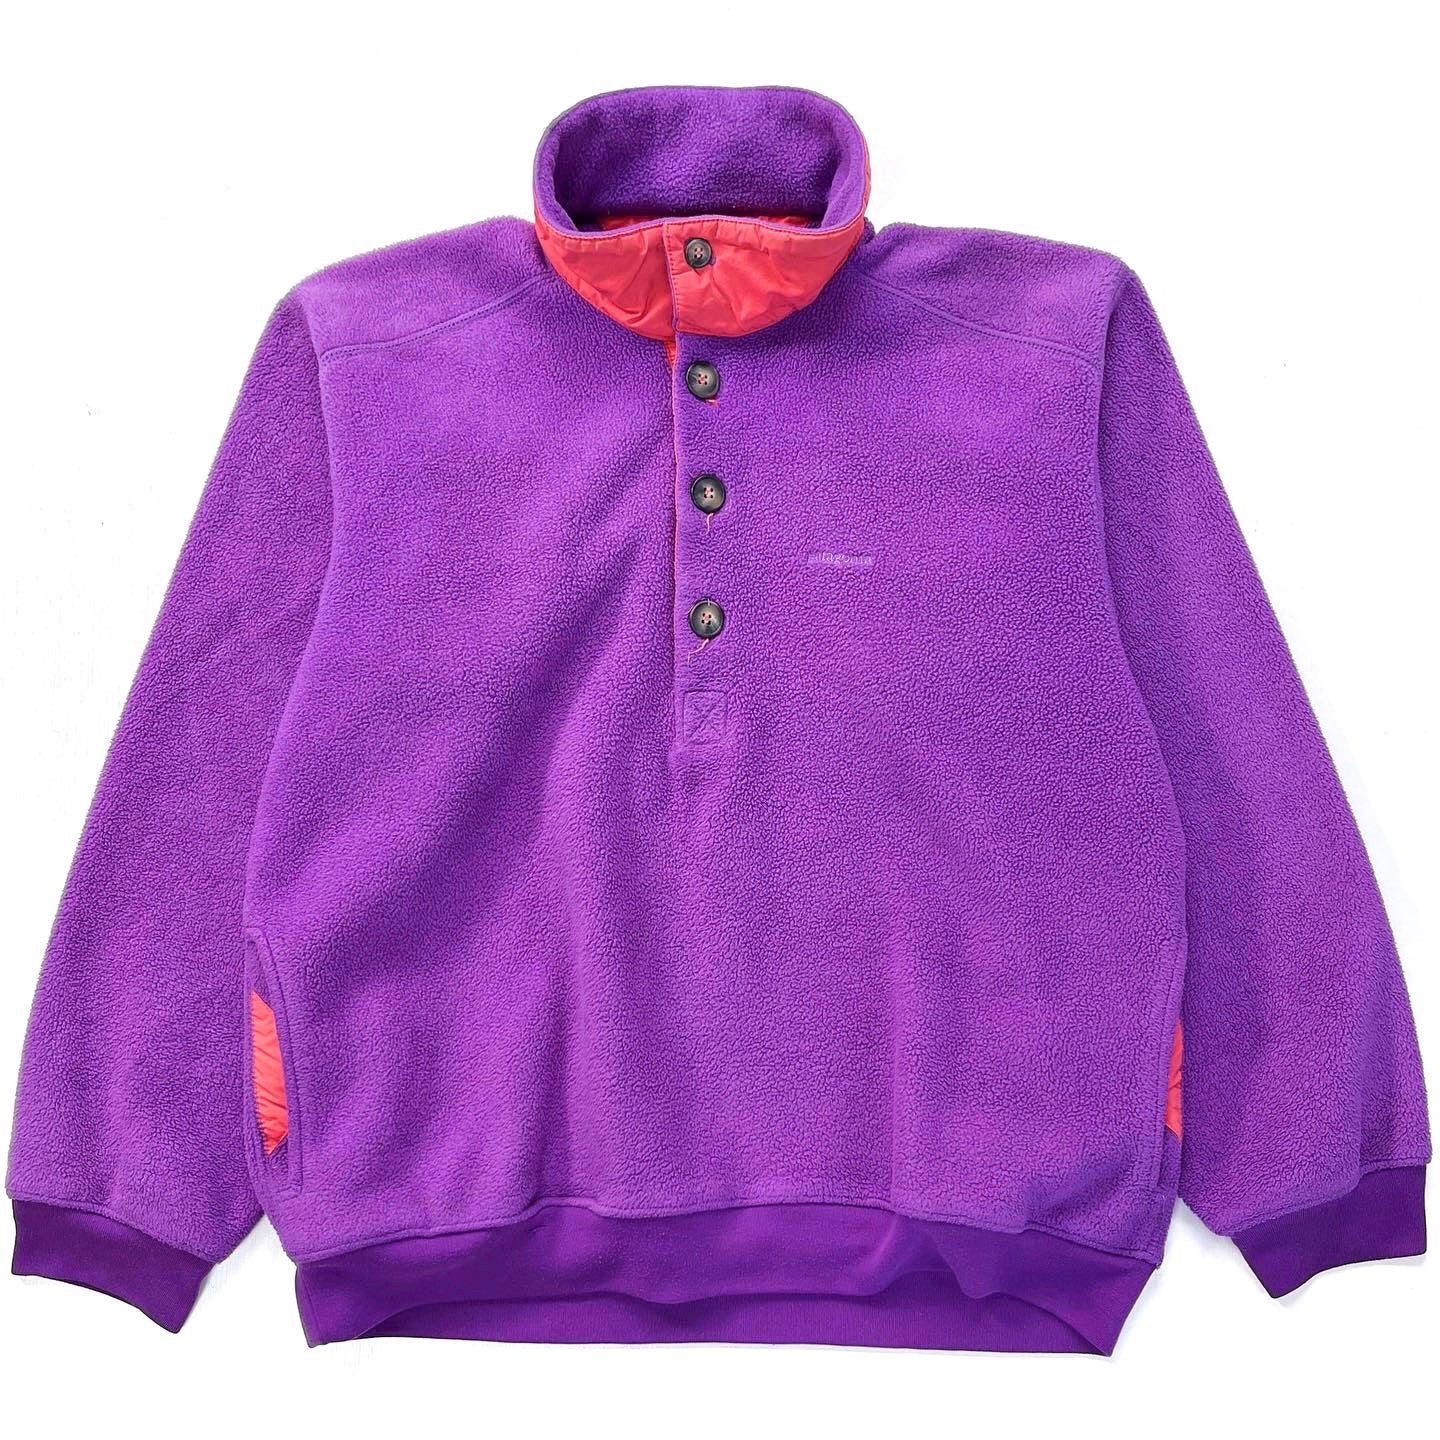 1991 Patagonia Collared Synchilla Sweater, Larkspur & Lobster (M)